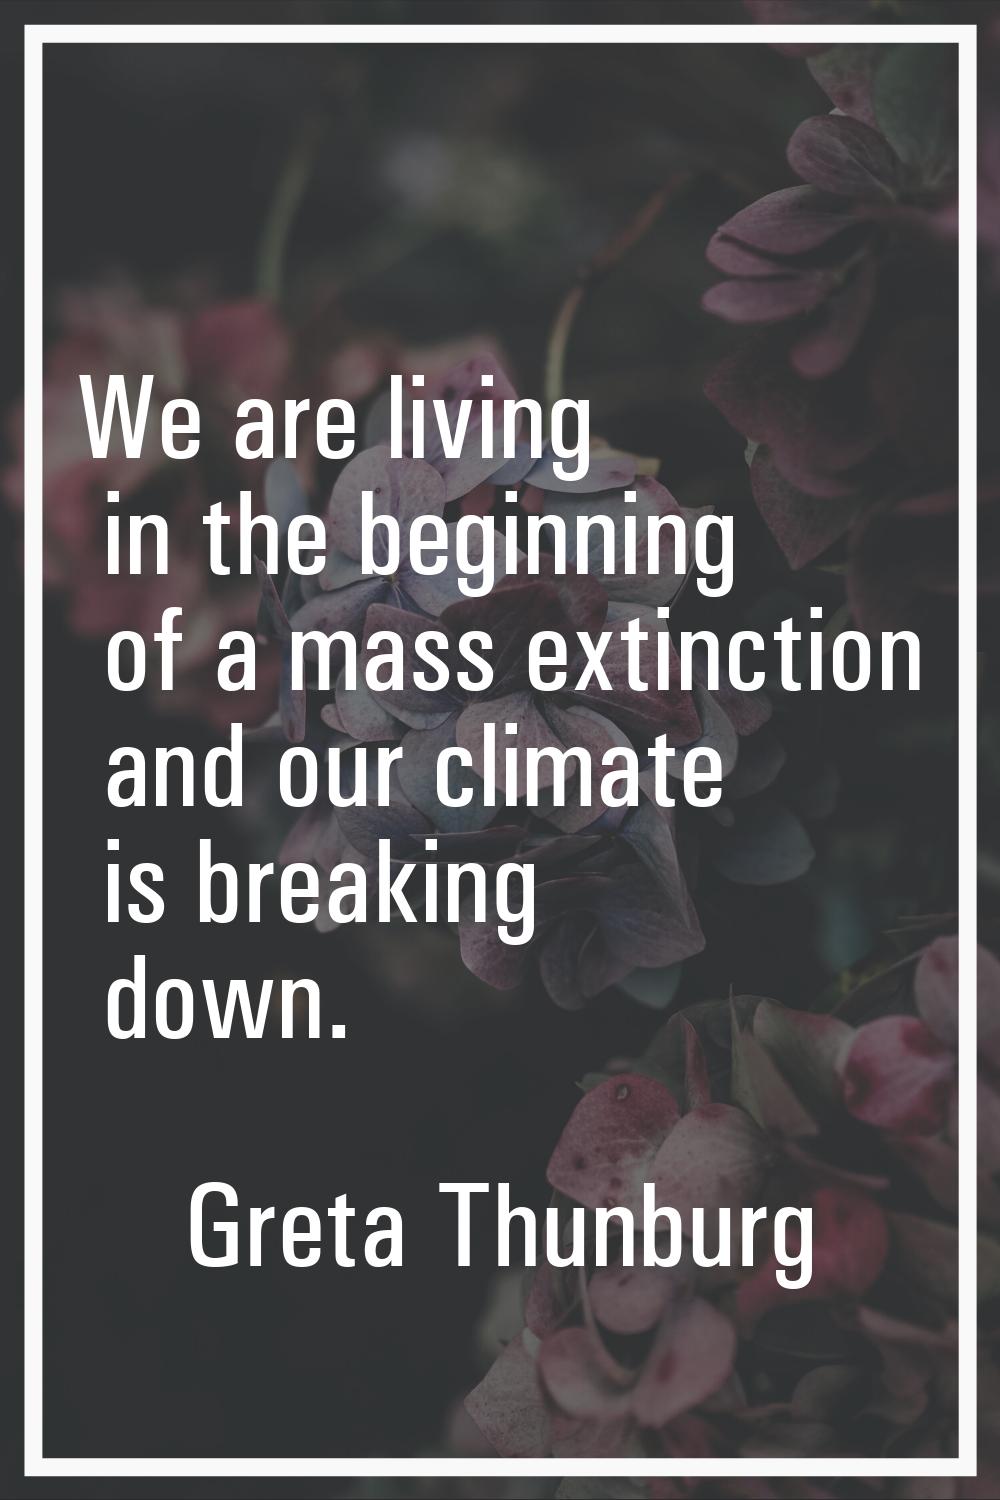 We are living in the beginning of a mass extinction and our climate is breaking down.